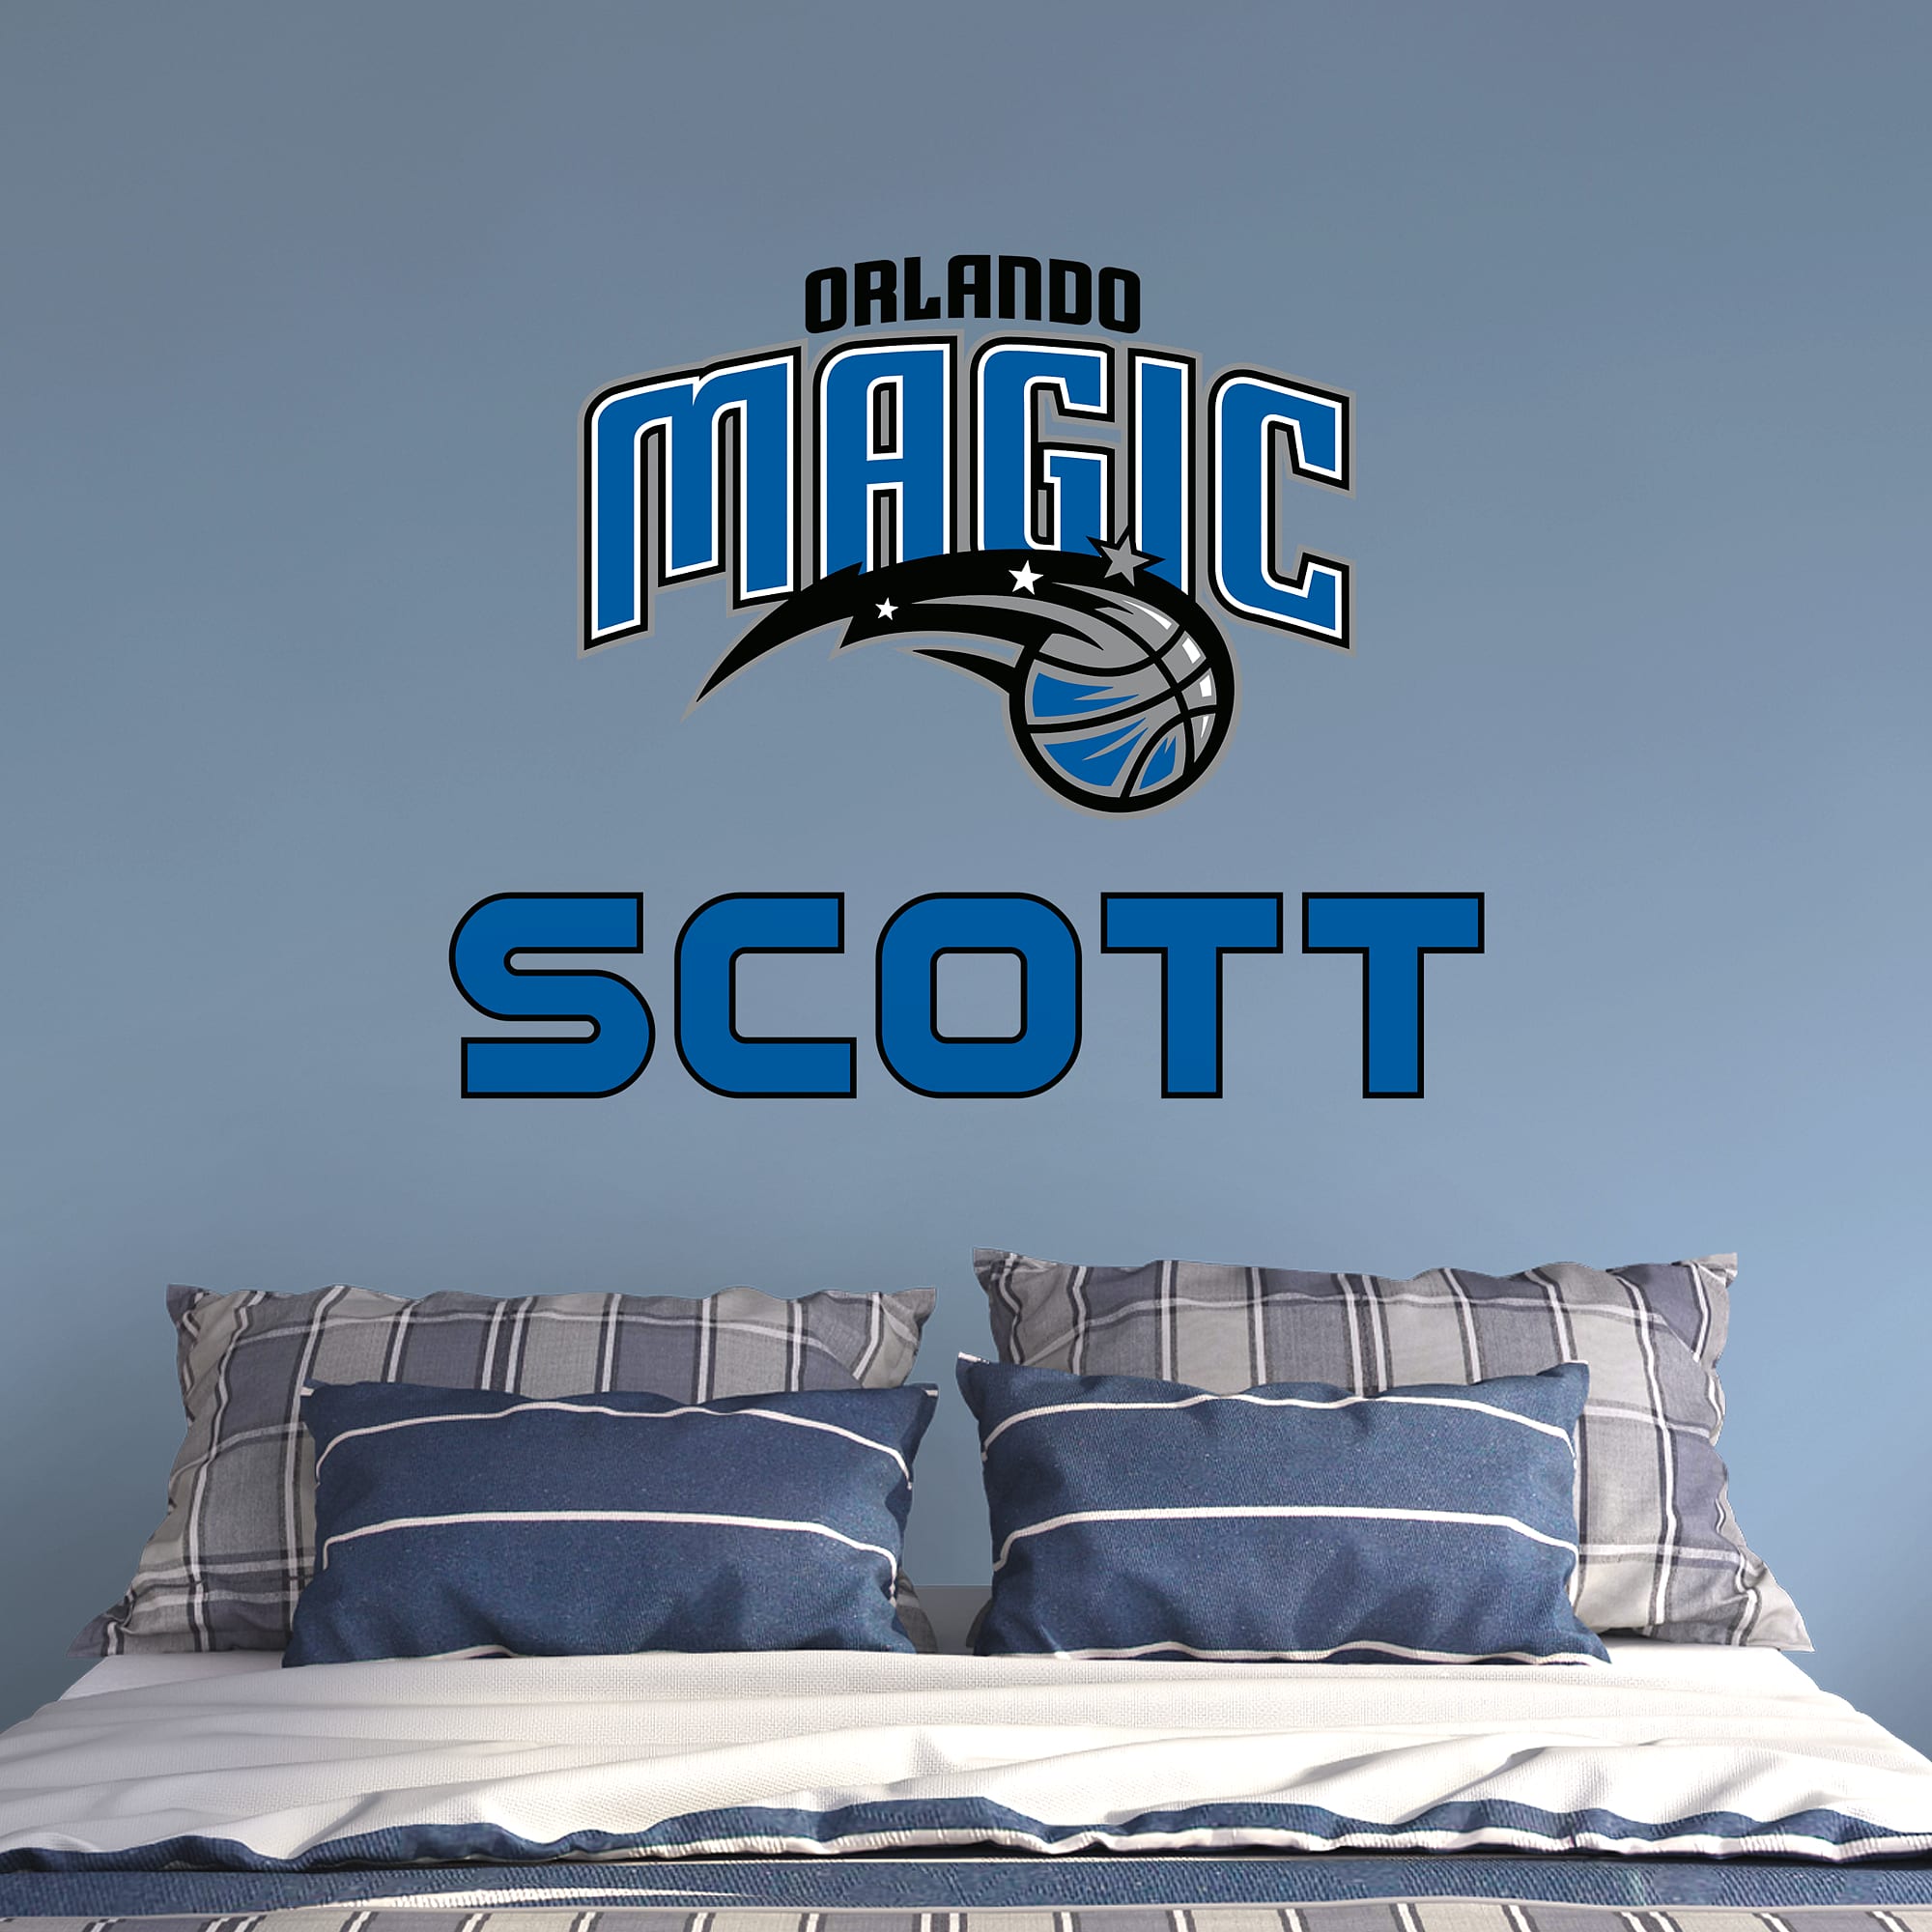 Orlando Magic: Stacked Personalized Name - Officially Licensed NBA Transfer Decal in Blue (52"W x 39.5"H) by Fathead | Vinyl